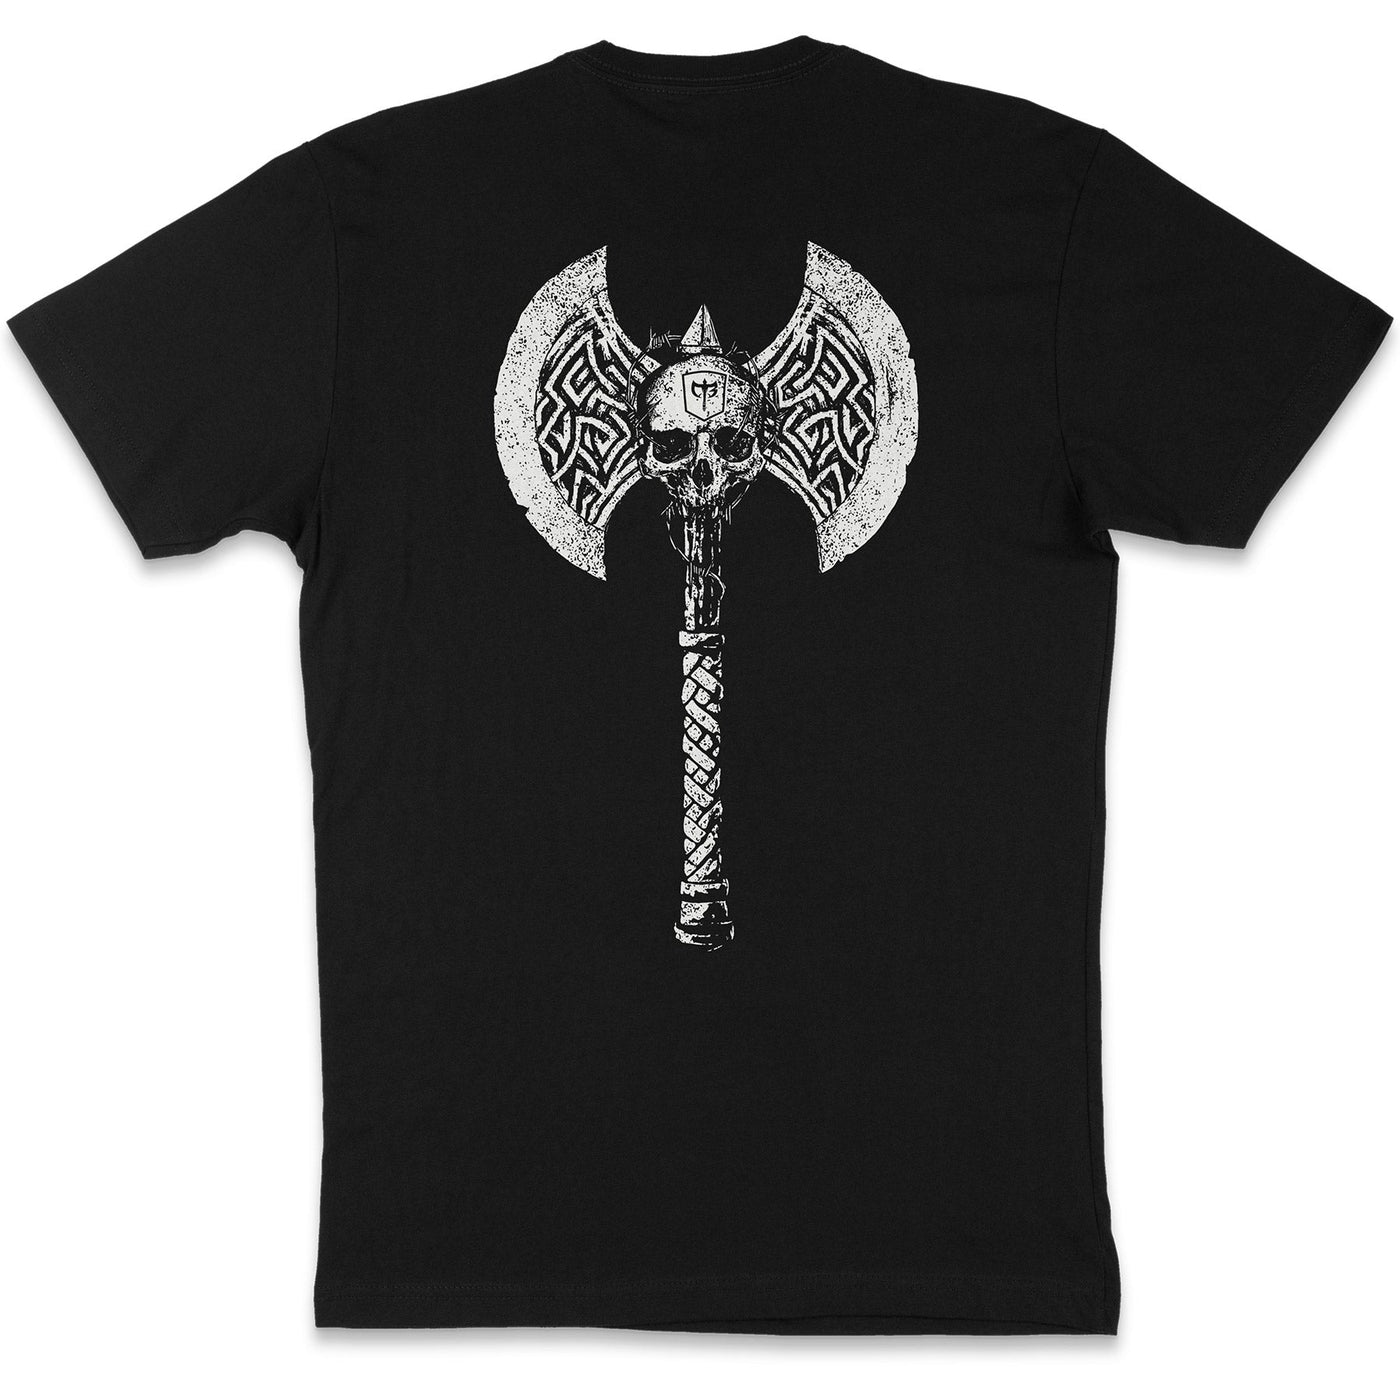 The Battle Axe - Black Tee - Conquering Barbell